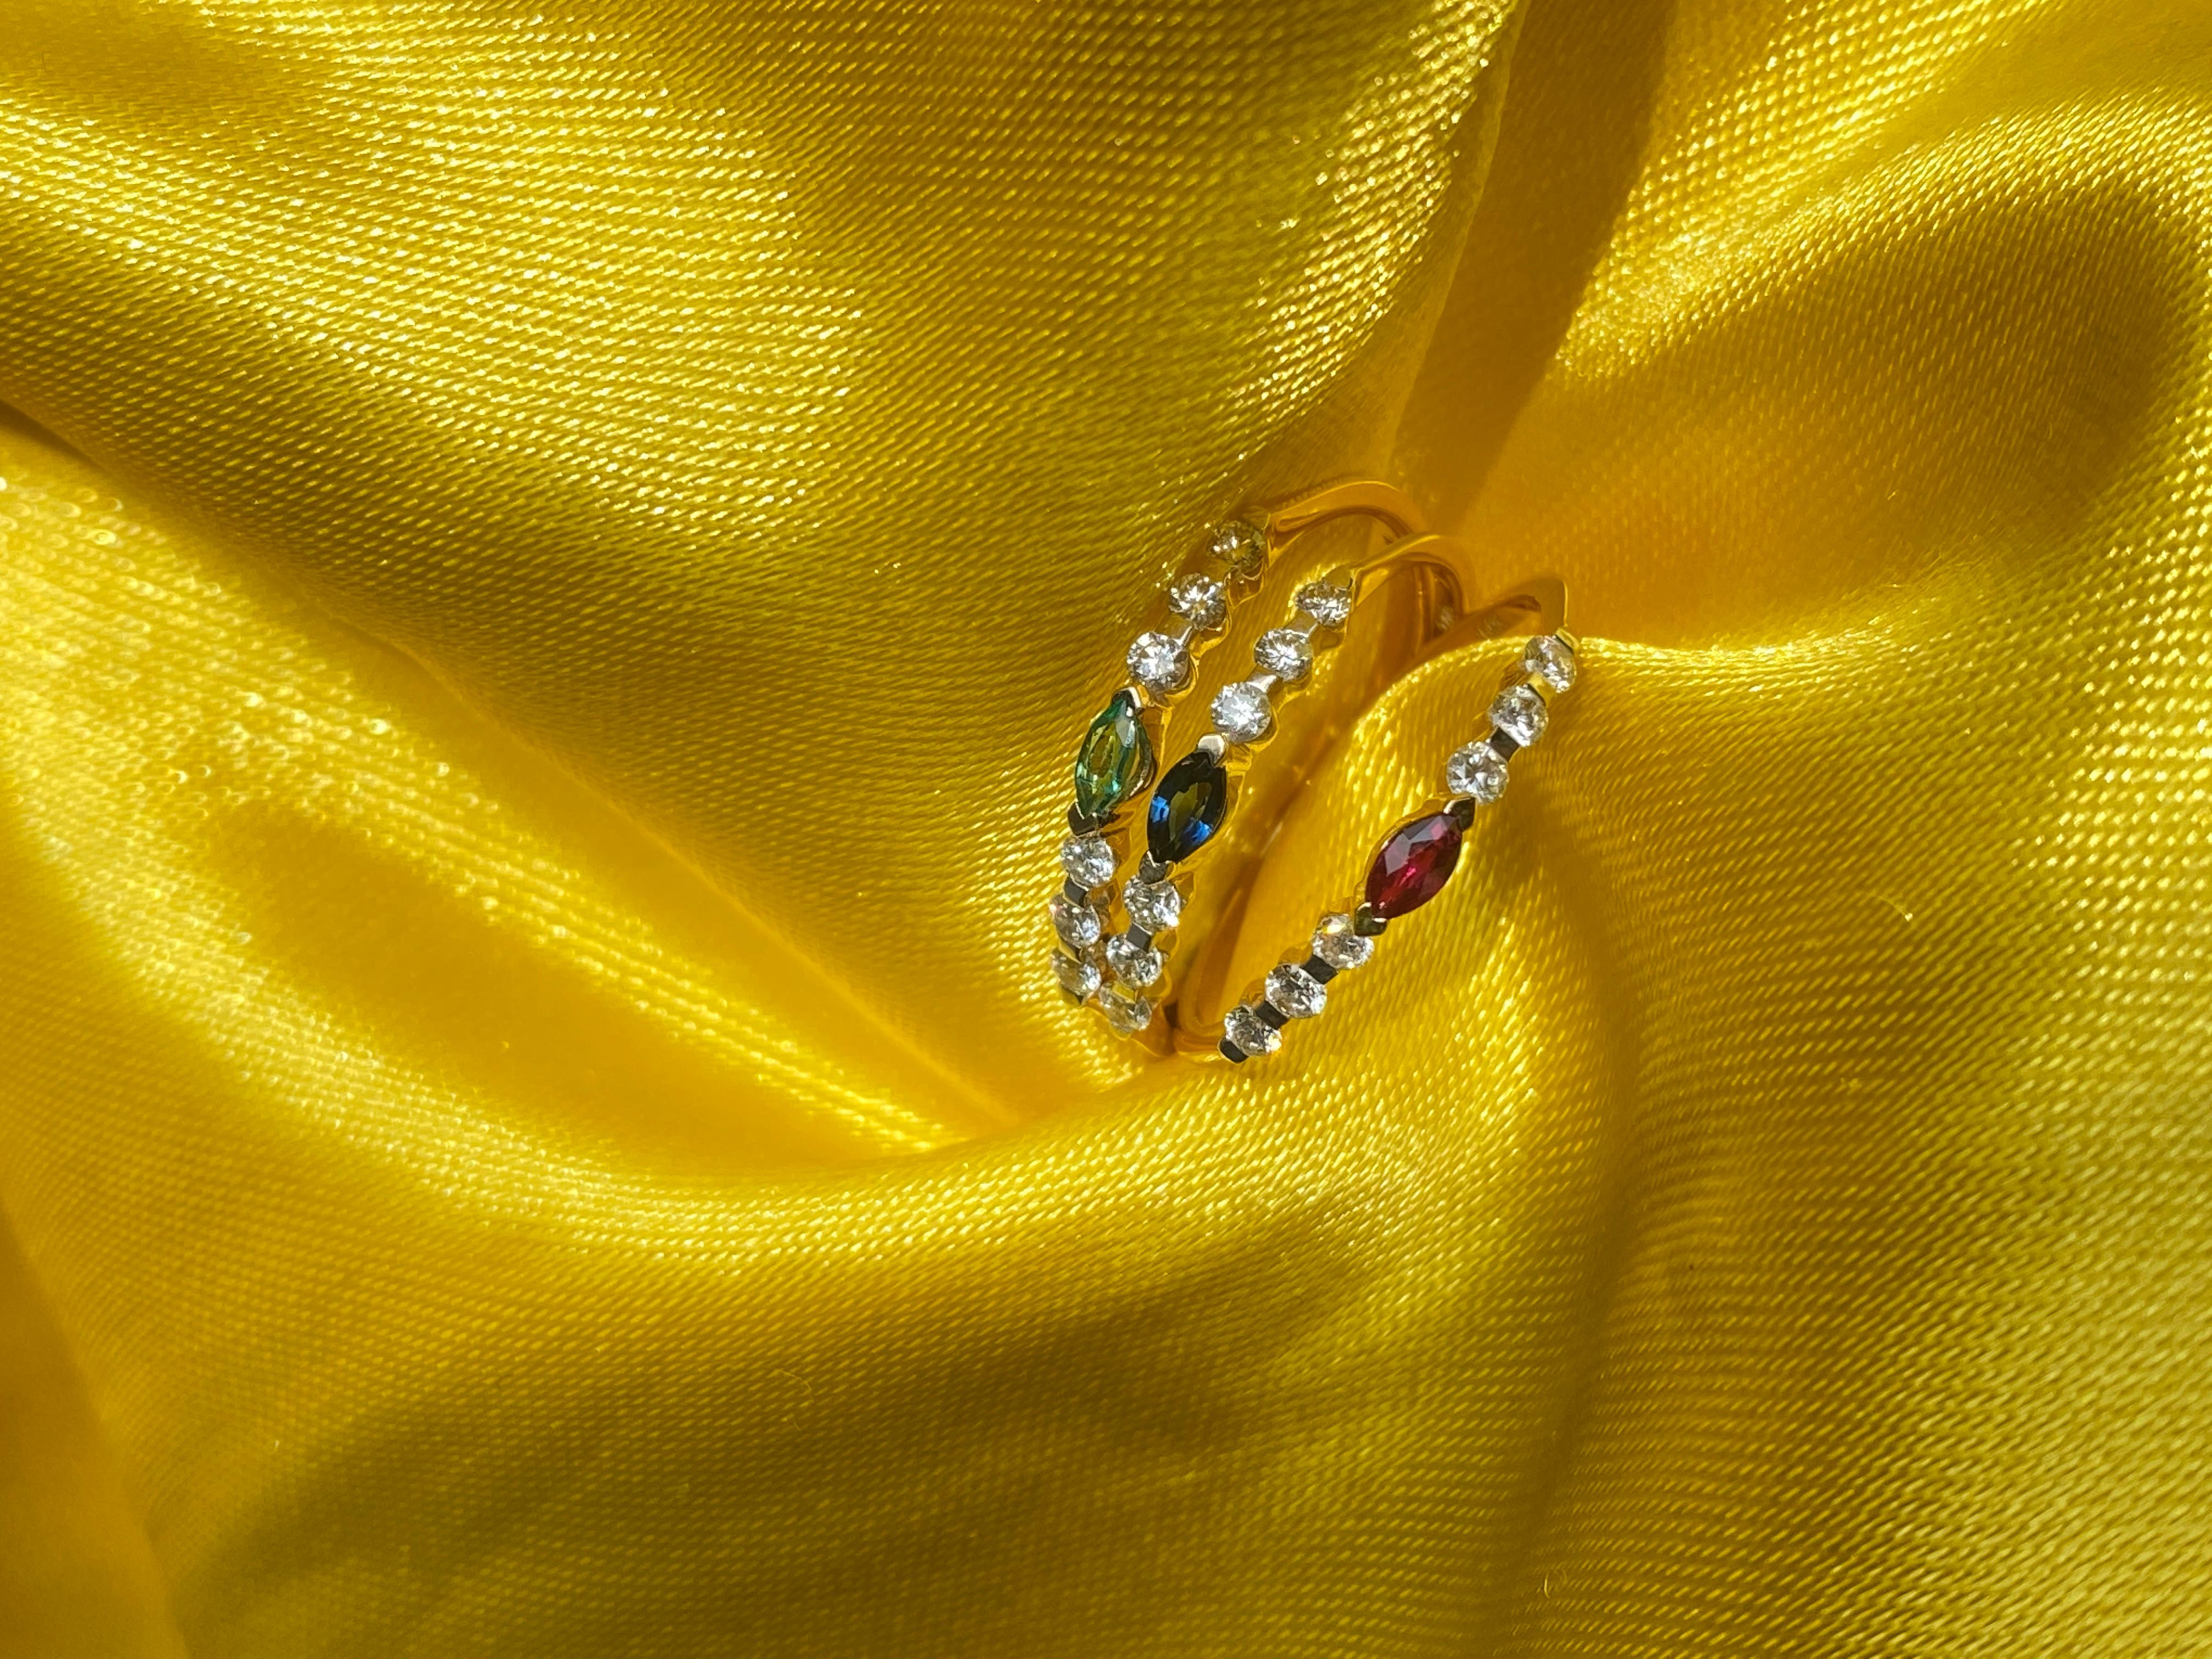 Marquise gemstones and diamonds set in 14k yellow gold! Gemstone center with diamond side stones, these rings are super dainty! They are petite, but strong! Small, but beautiful! They make a statement, but can be stacked! Ruby, Sapphire, and Emerald